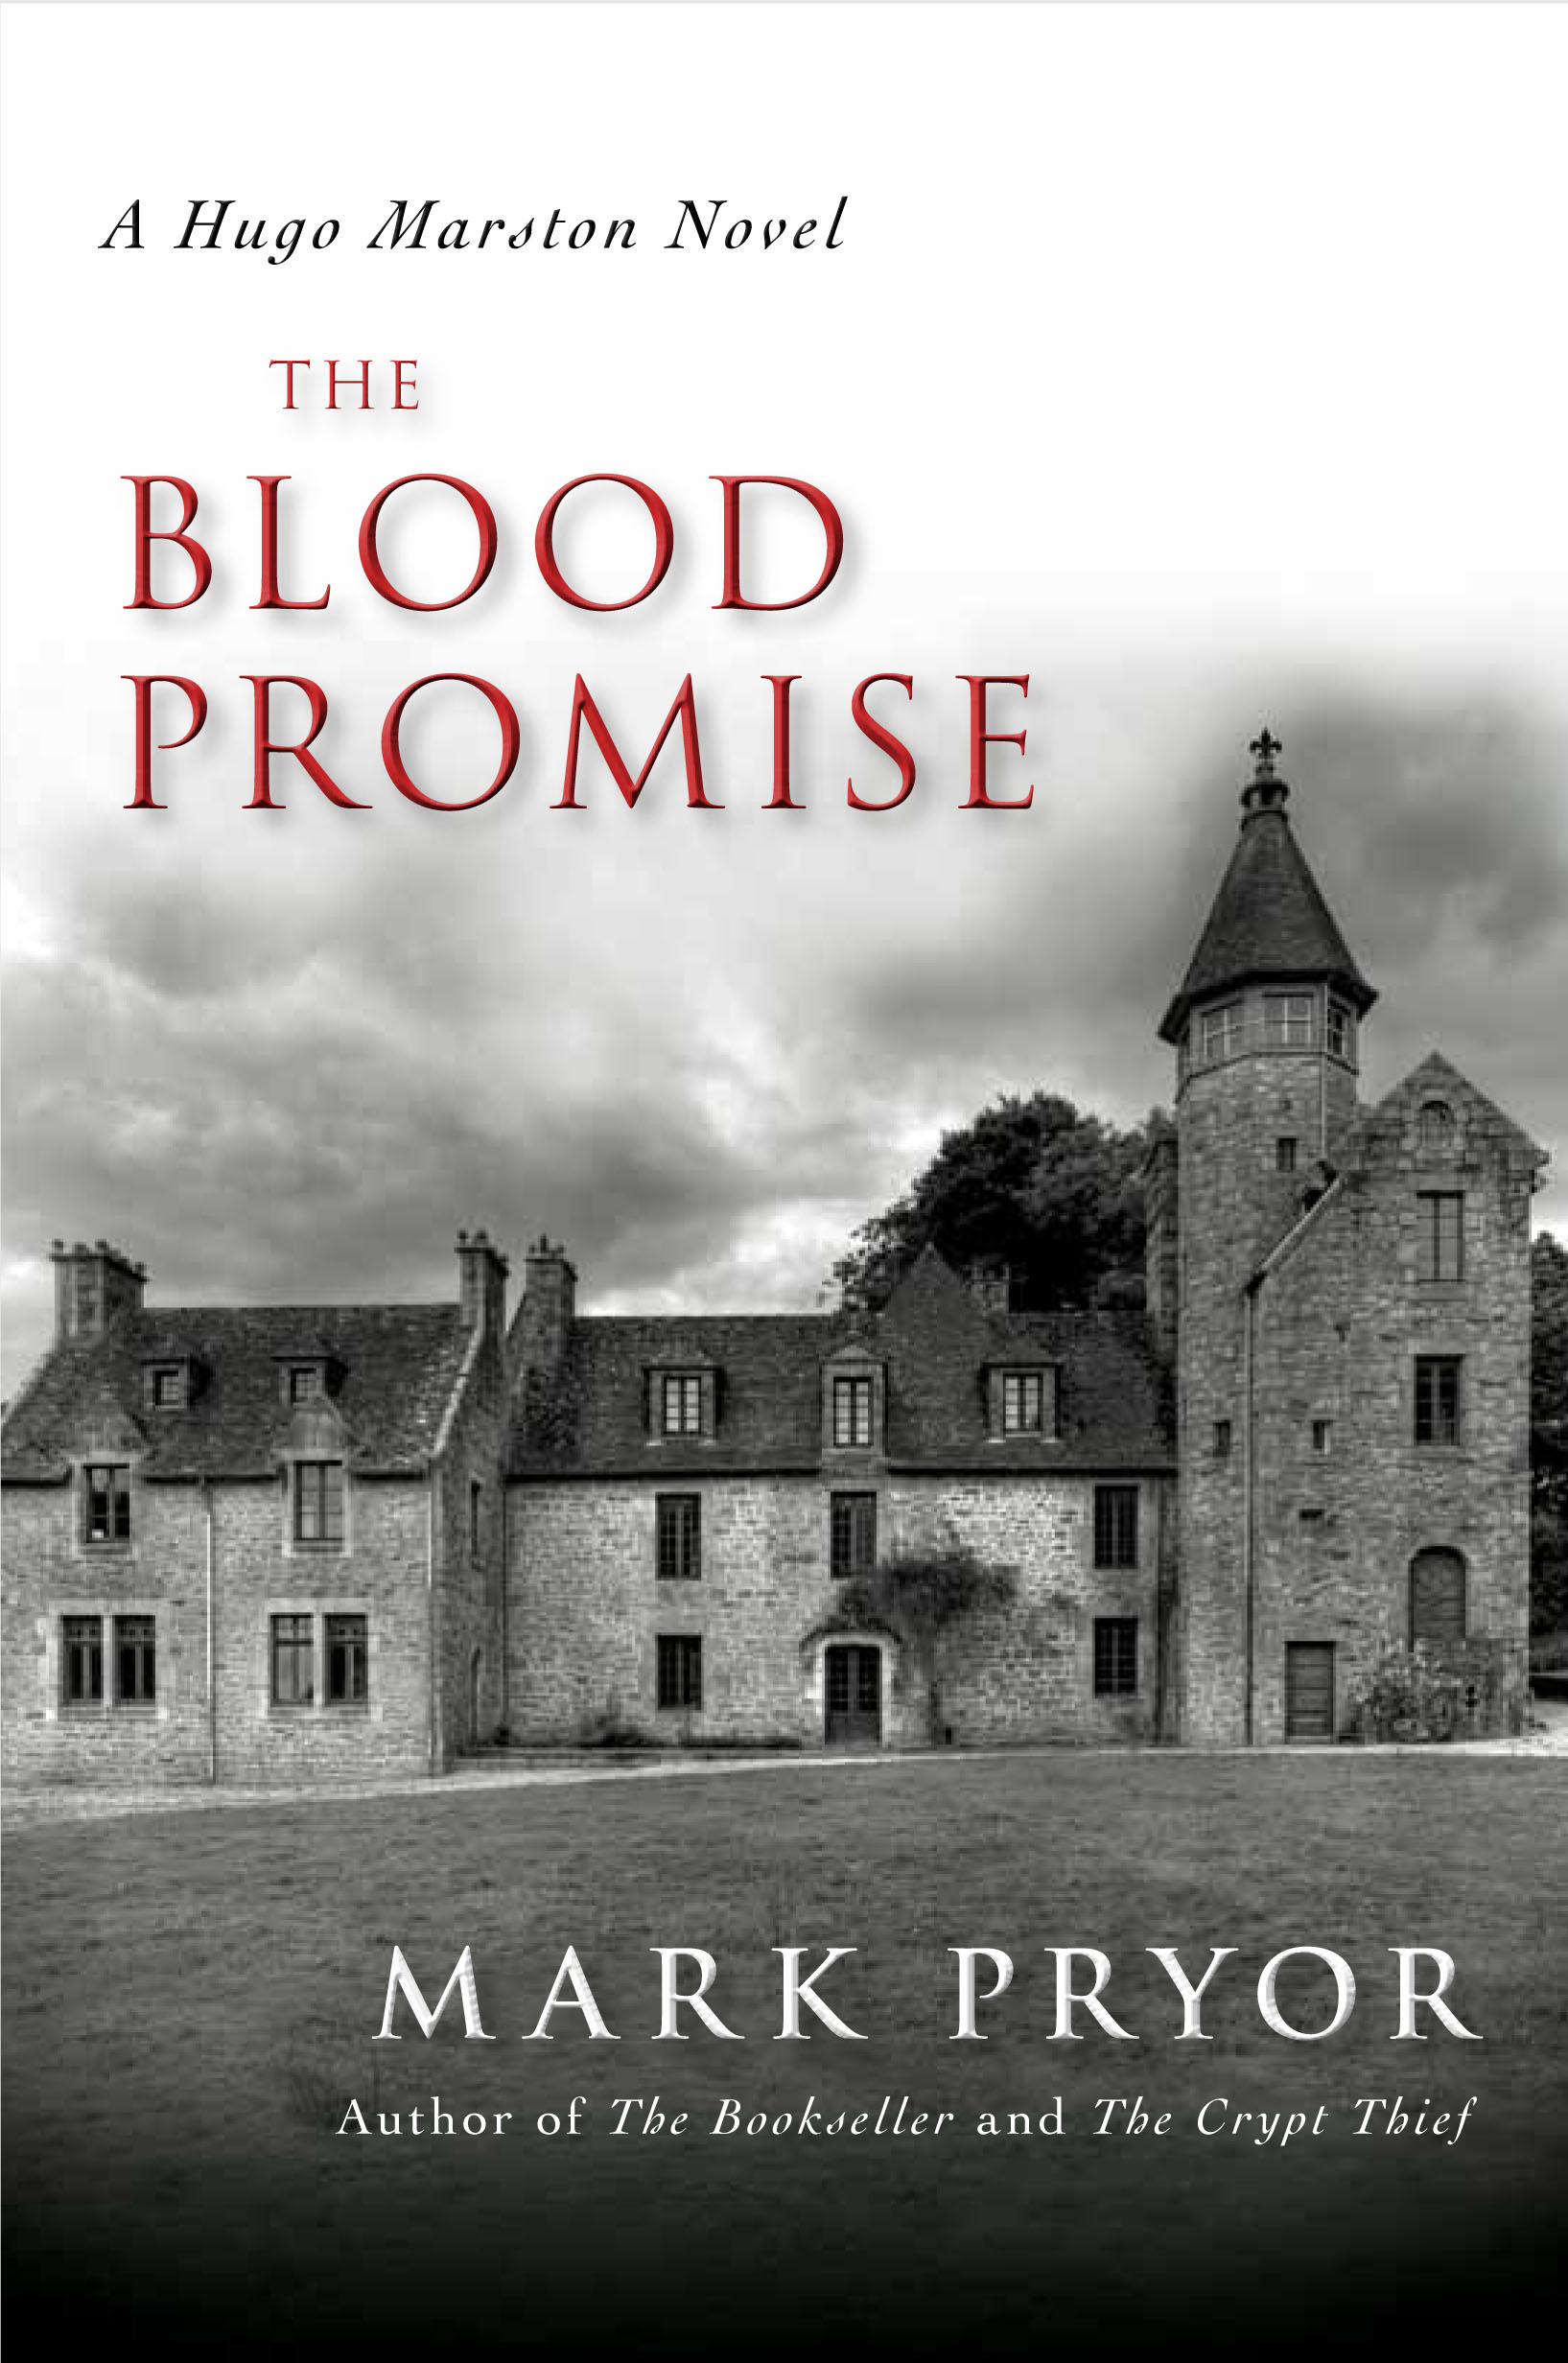 The Blood Promise